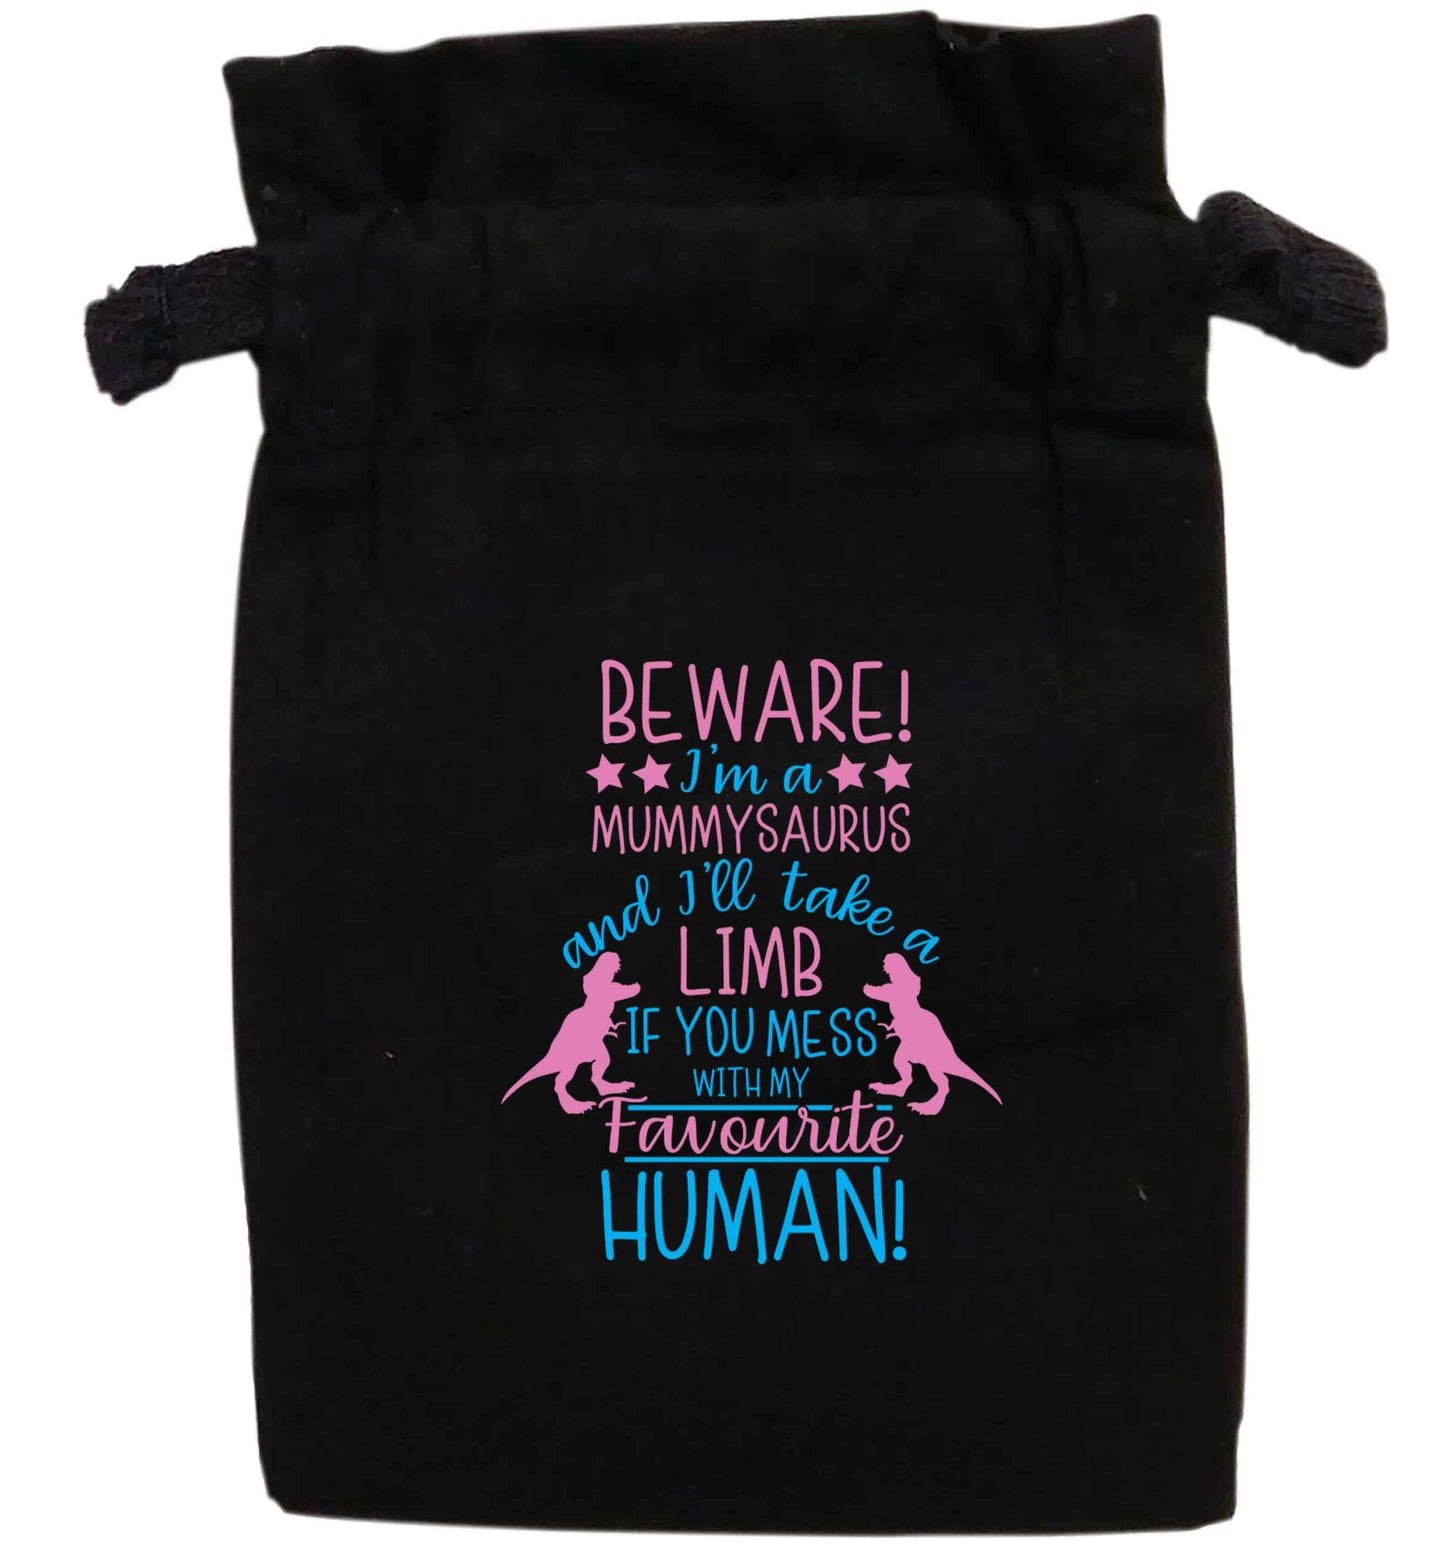 Beware I'm a mummysaurus and I'll take a limb if you mess with my favourite human | XS - L | Pouch / Drawstring bag / Sack | Organic Cotton | Bulk discounts available!